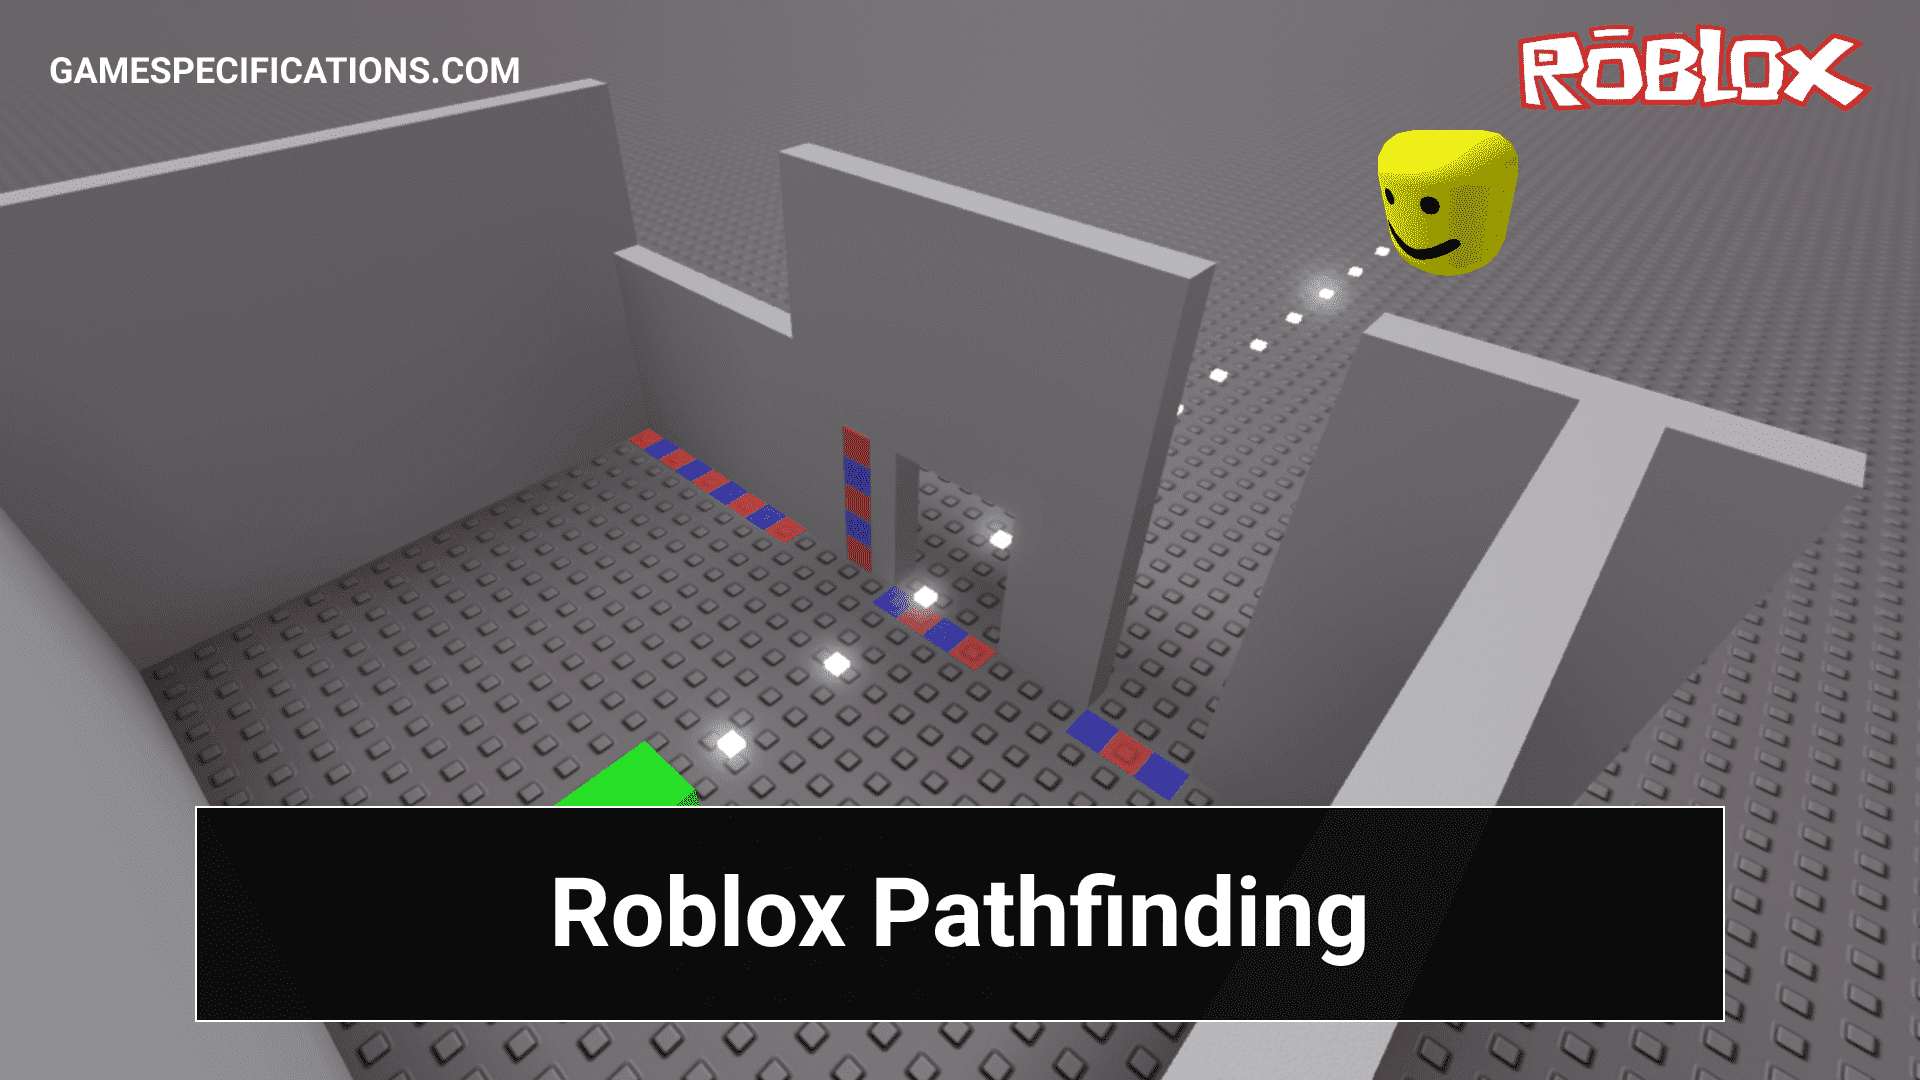 Roblox Pathfinding How To Find The Smallest And Smartest Path In Roblox Game Specifications - roblox pathfinding tutorial